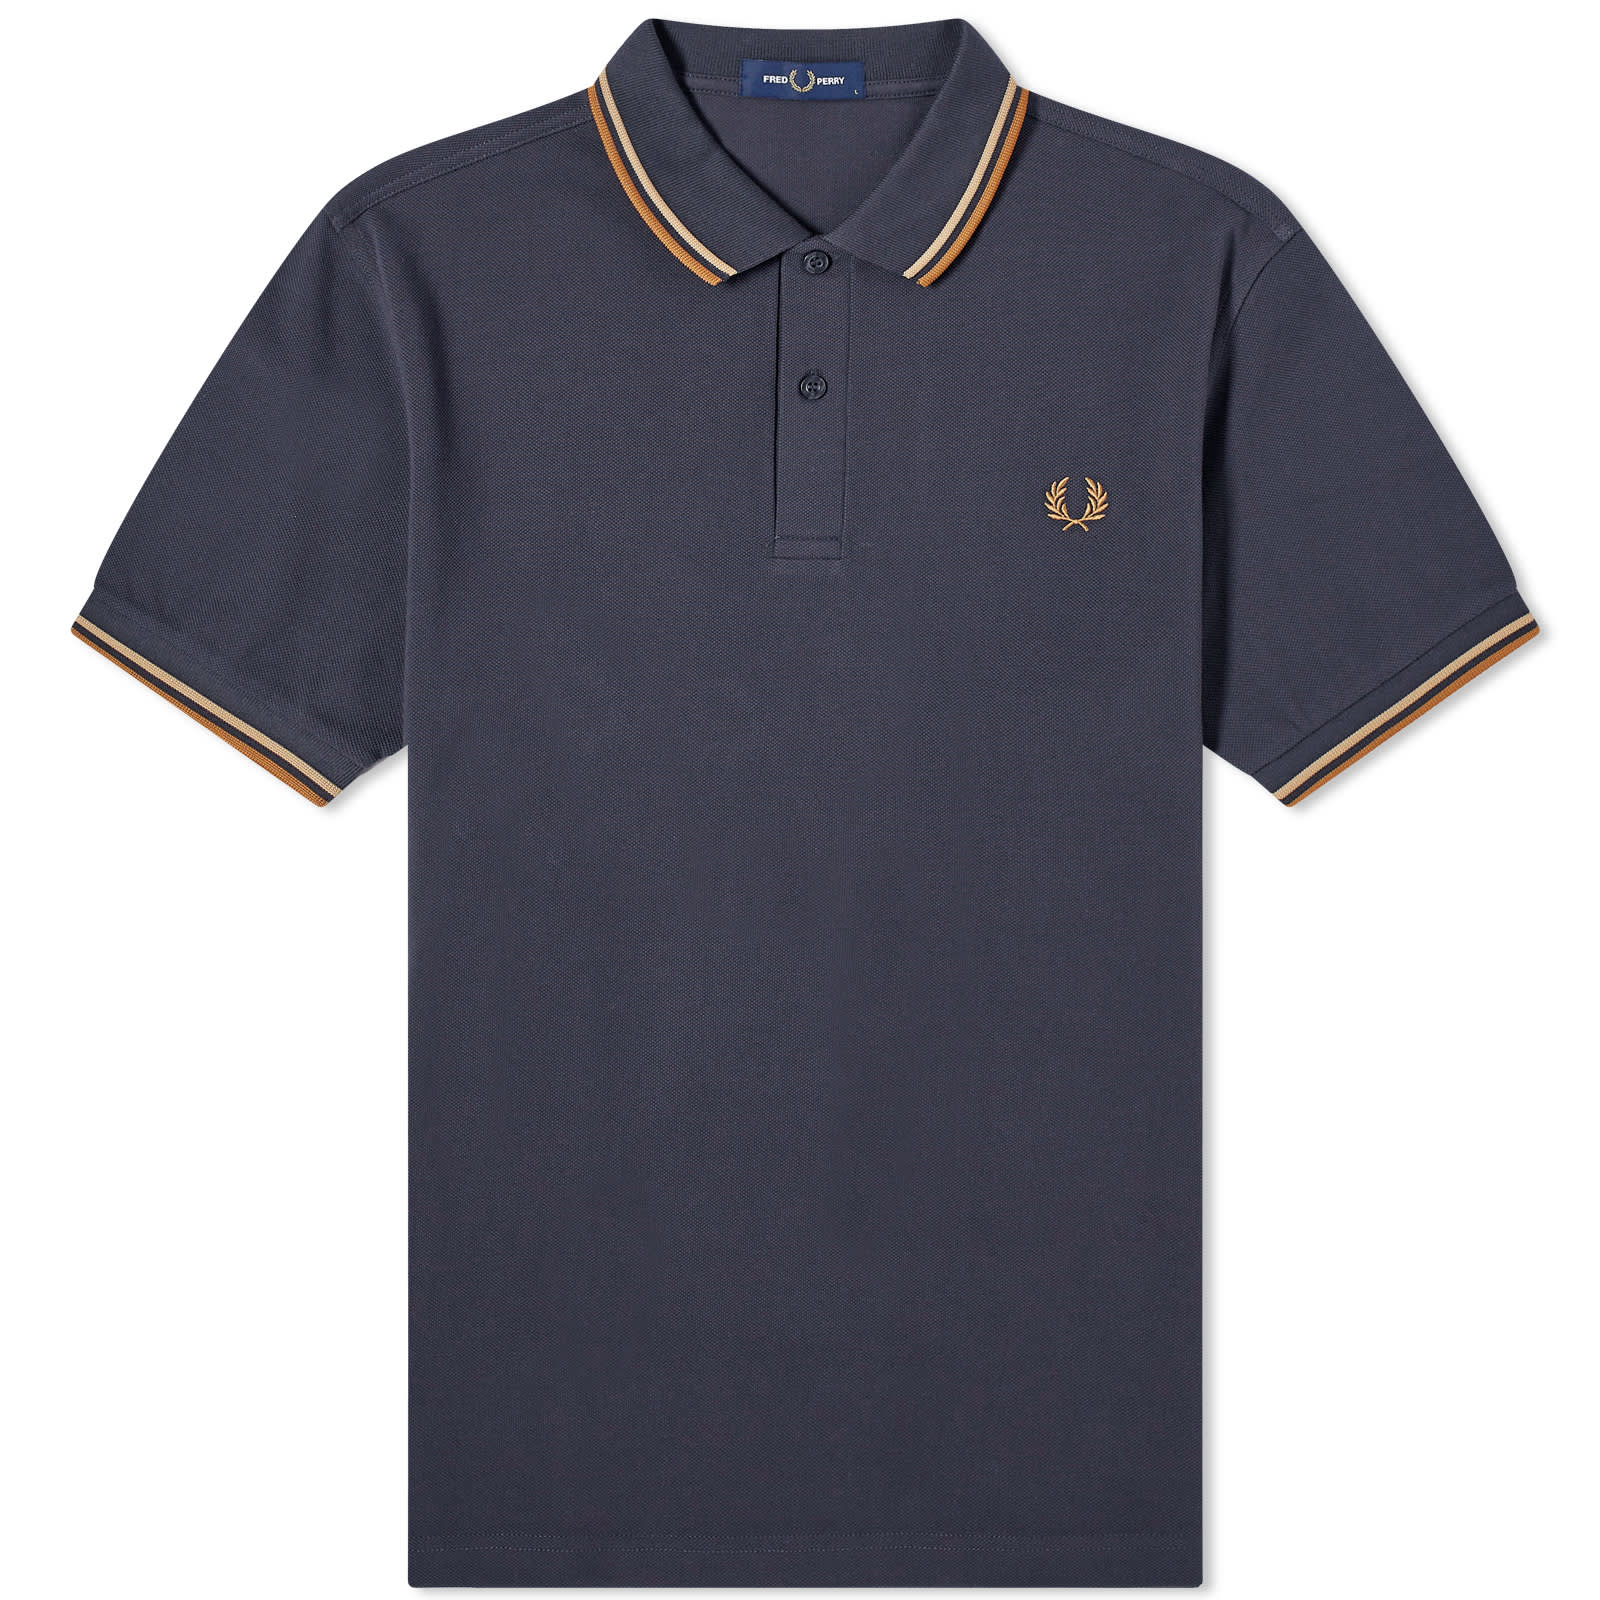 Поло Fred Perry Twin Tipped, цвет Grey, Stone & Caramel футболка fred perry authentic twin tipped бордовый